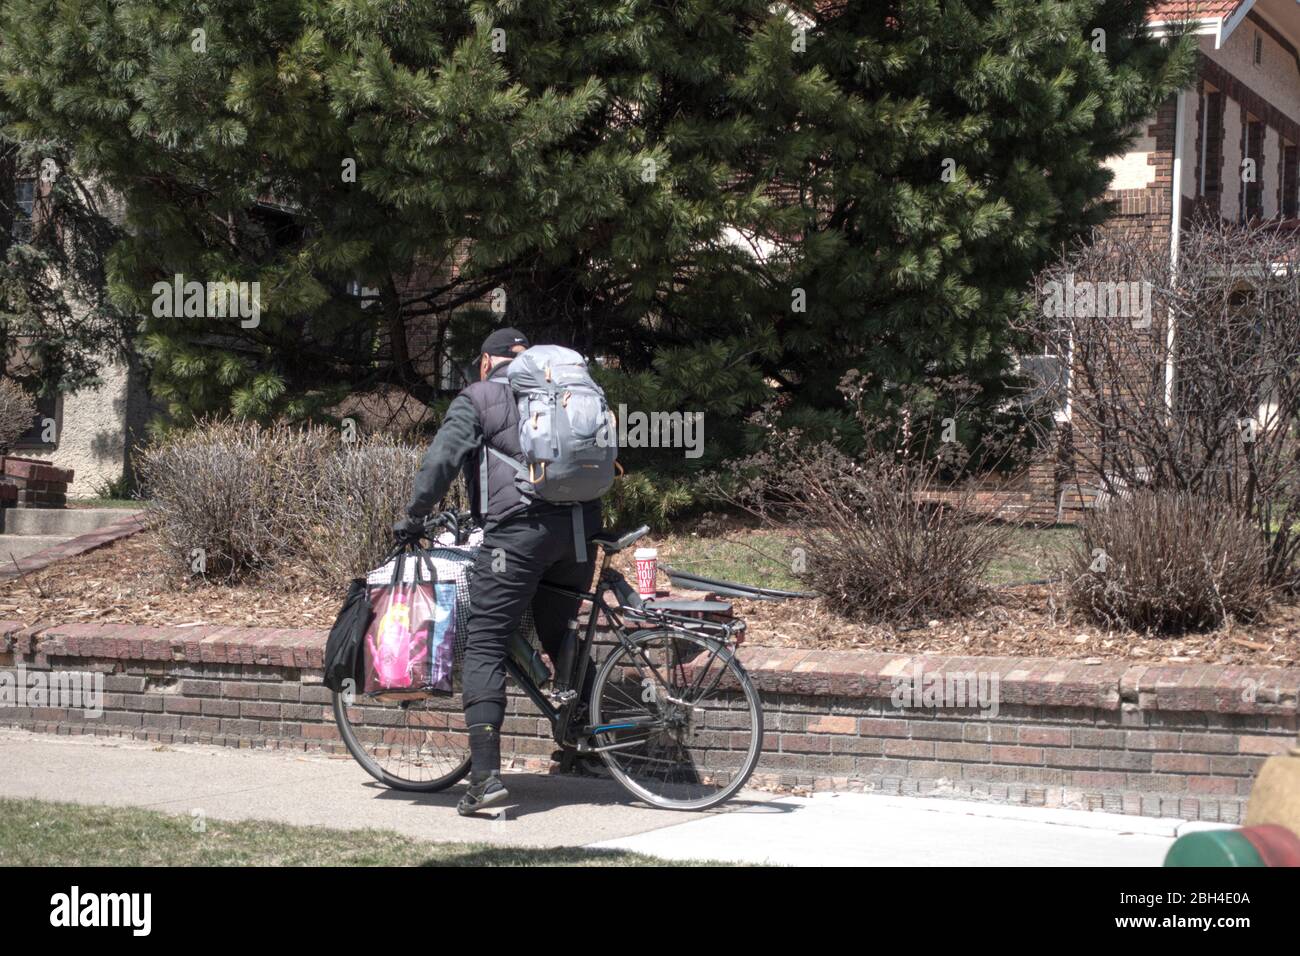 Man on bicycle loaded with packages. Could be homeless or delivering food and supplies during the Covid-19 pandemic. St Paul Minnesota MN USA Stock Photo